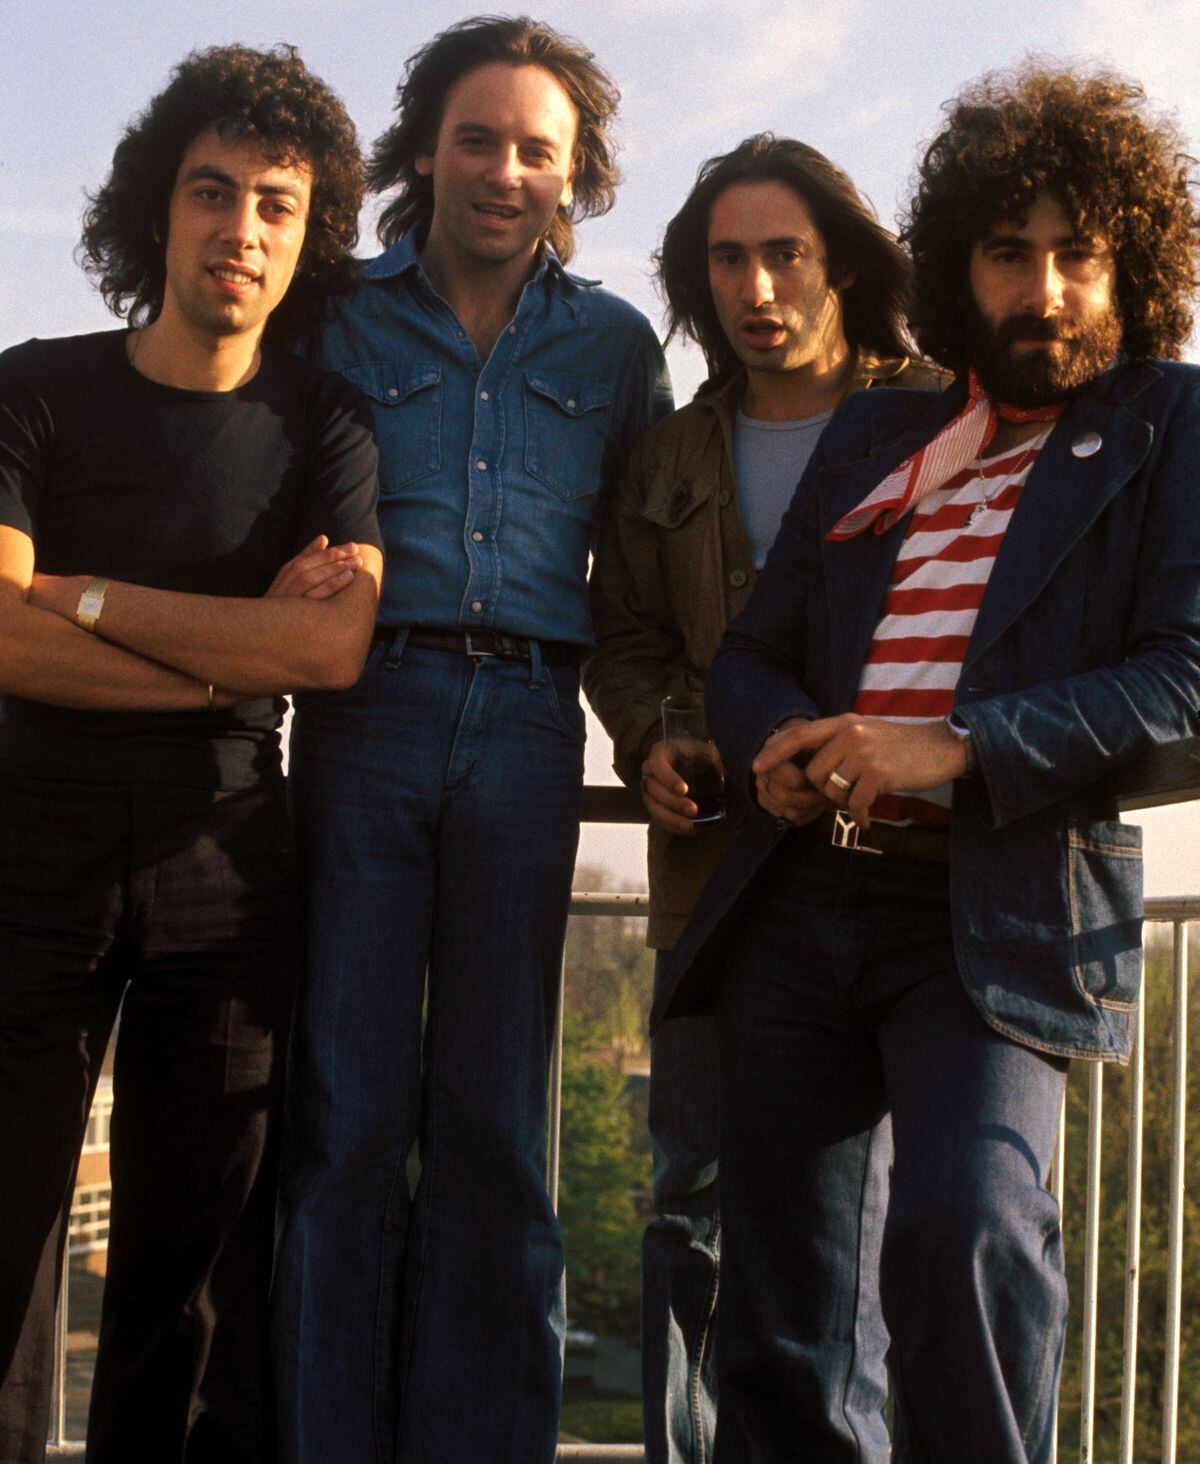 10cc had a string of hits in the 70s